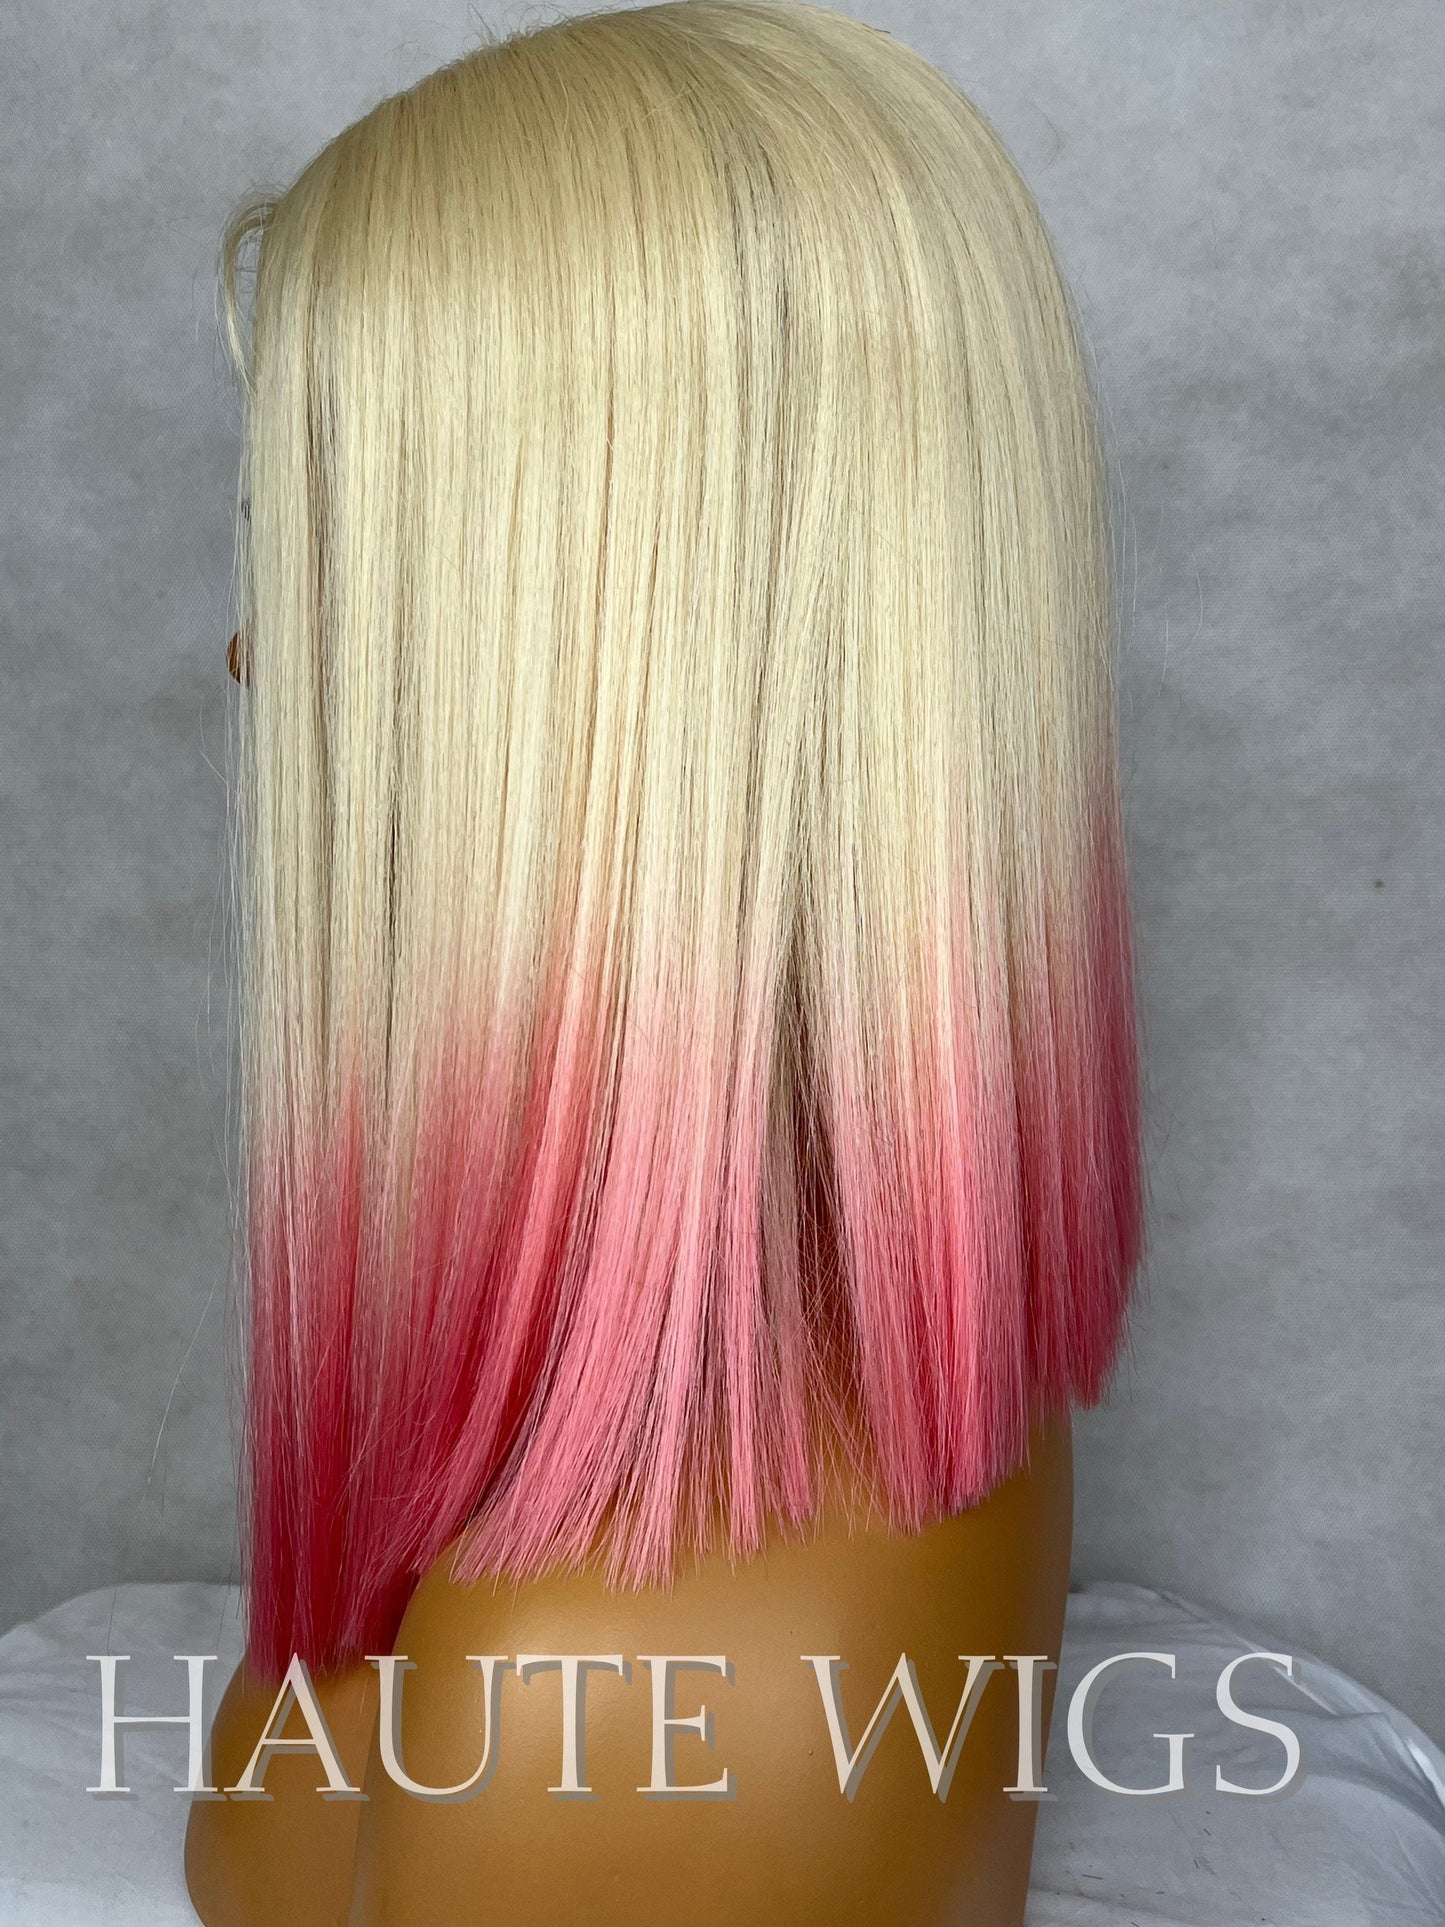 Ombré 613 Creamy Blonde Neon Pink Ends Dip Dye Wig Center Part Short Straight NO Lace Front Human Hair Blends Wig Ladies Gift for her